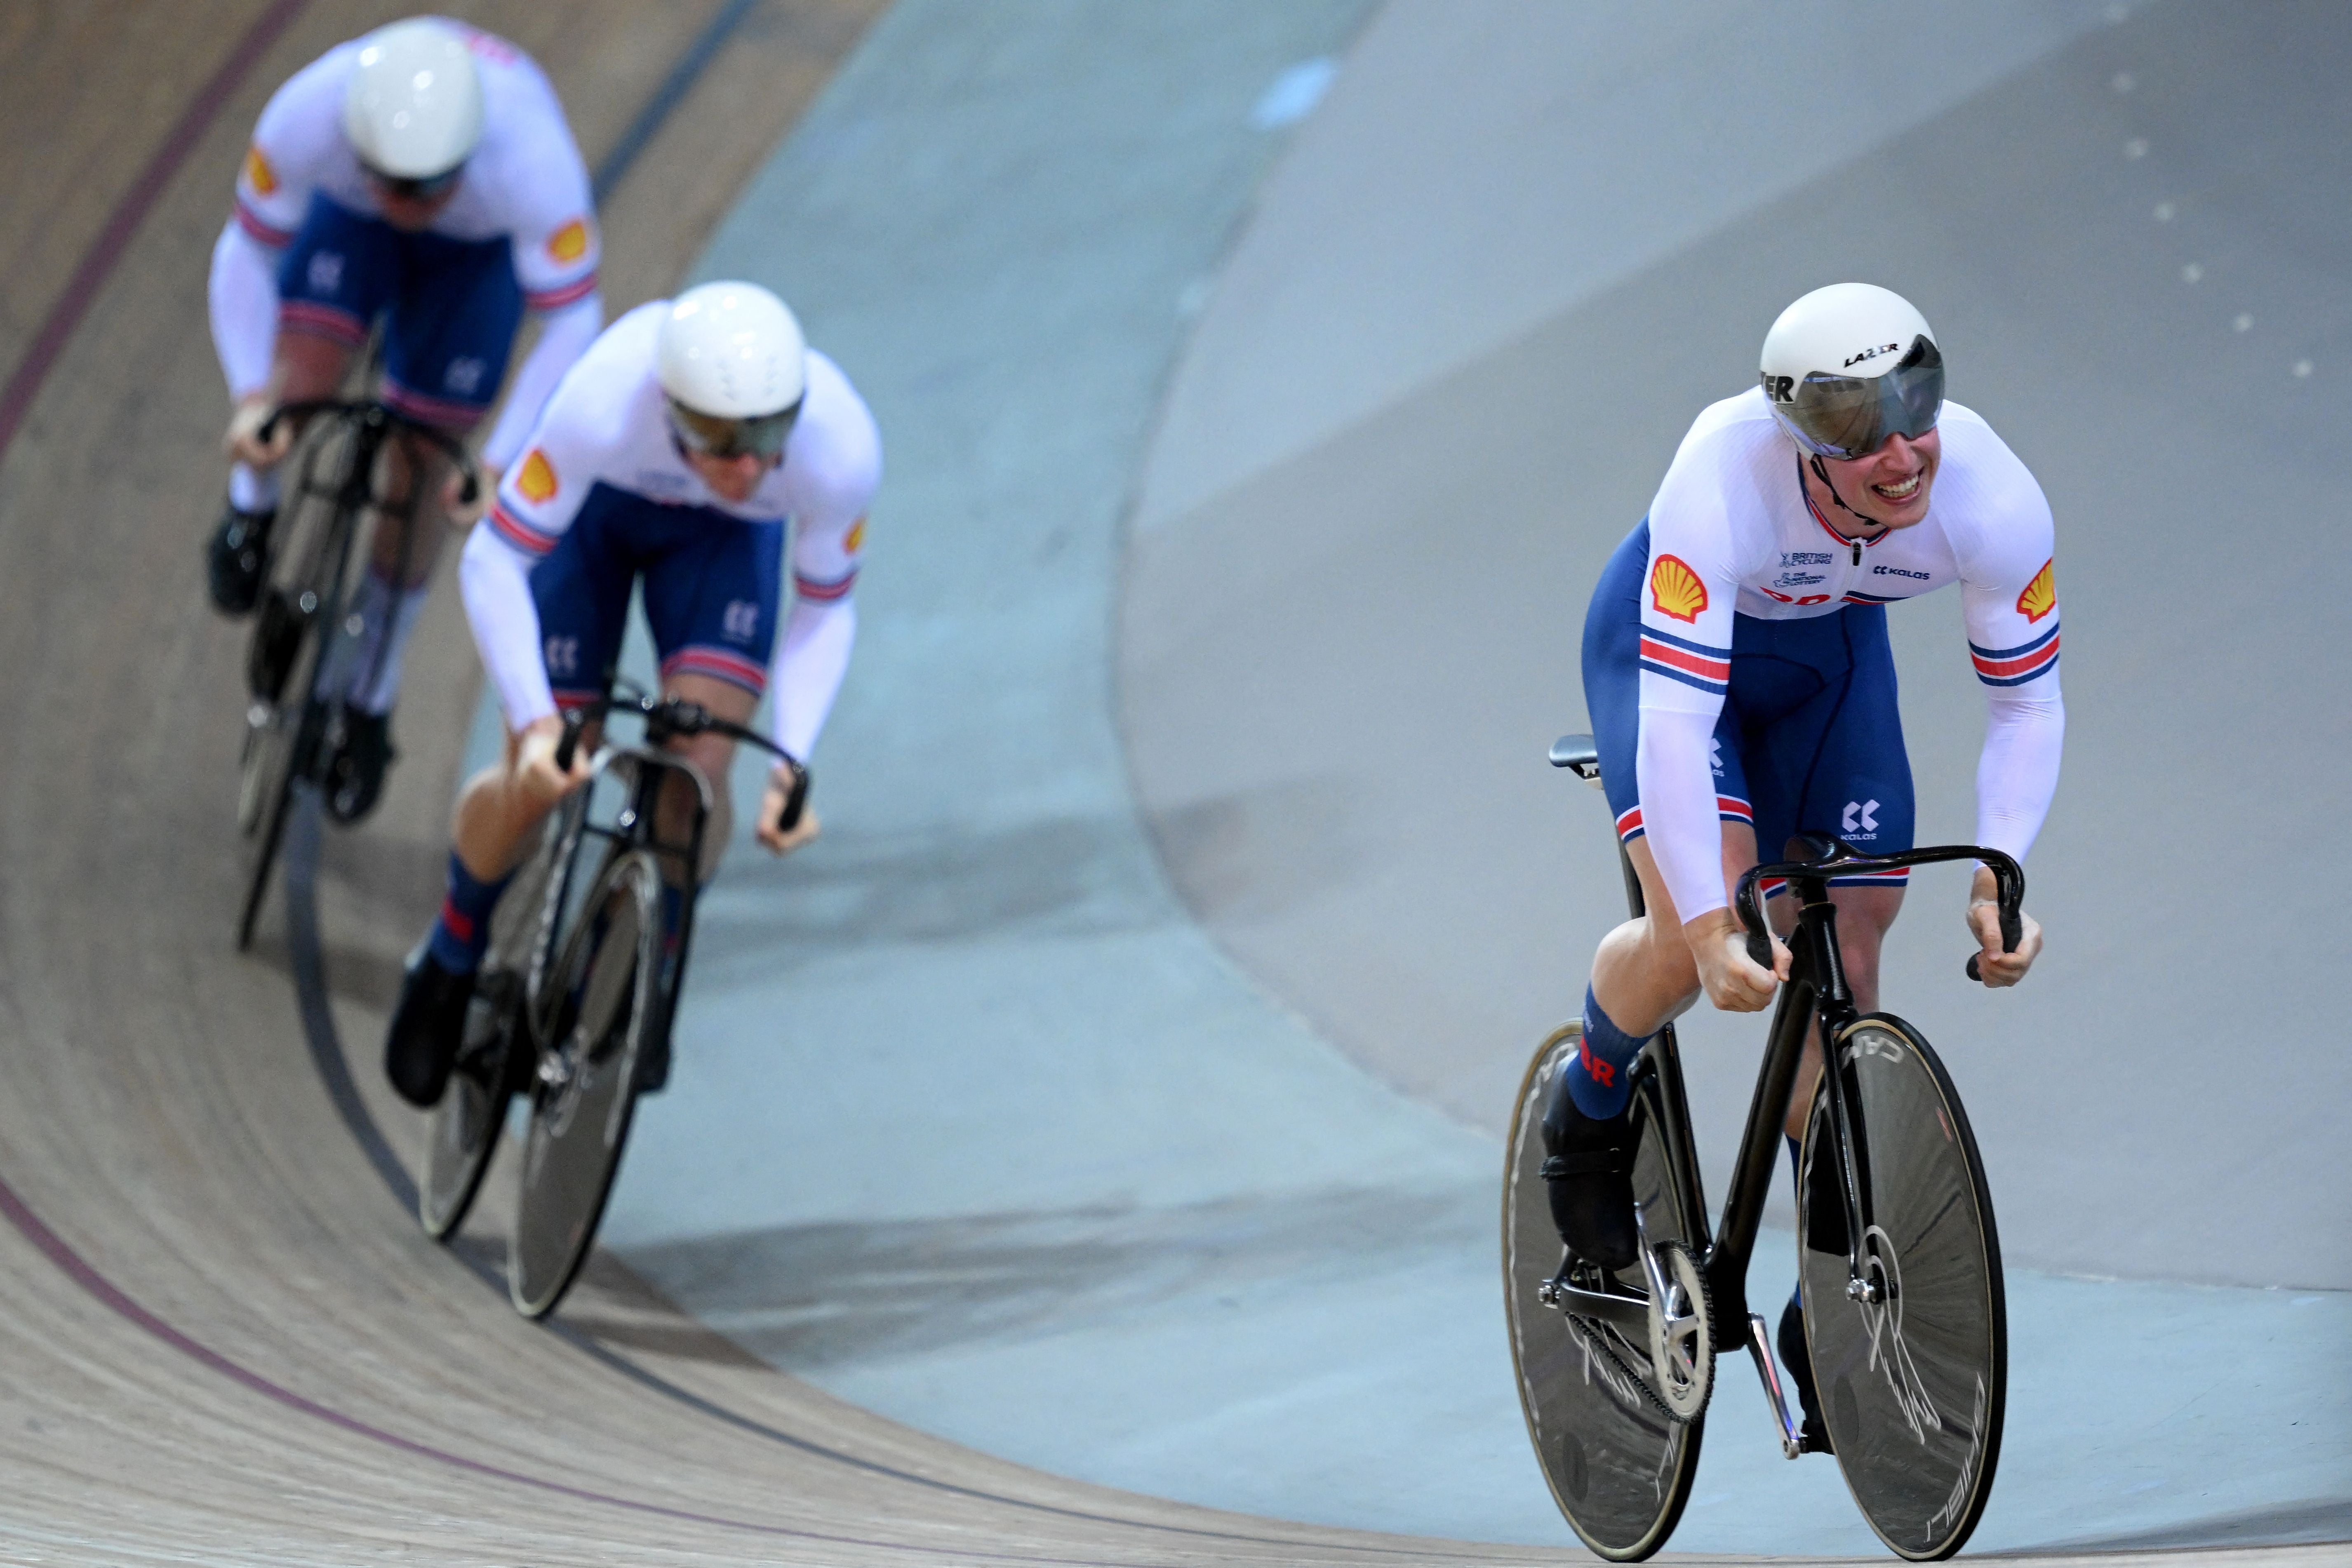 A deal with Shell – British Cycling thinking? | The